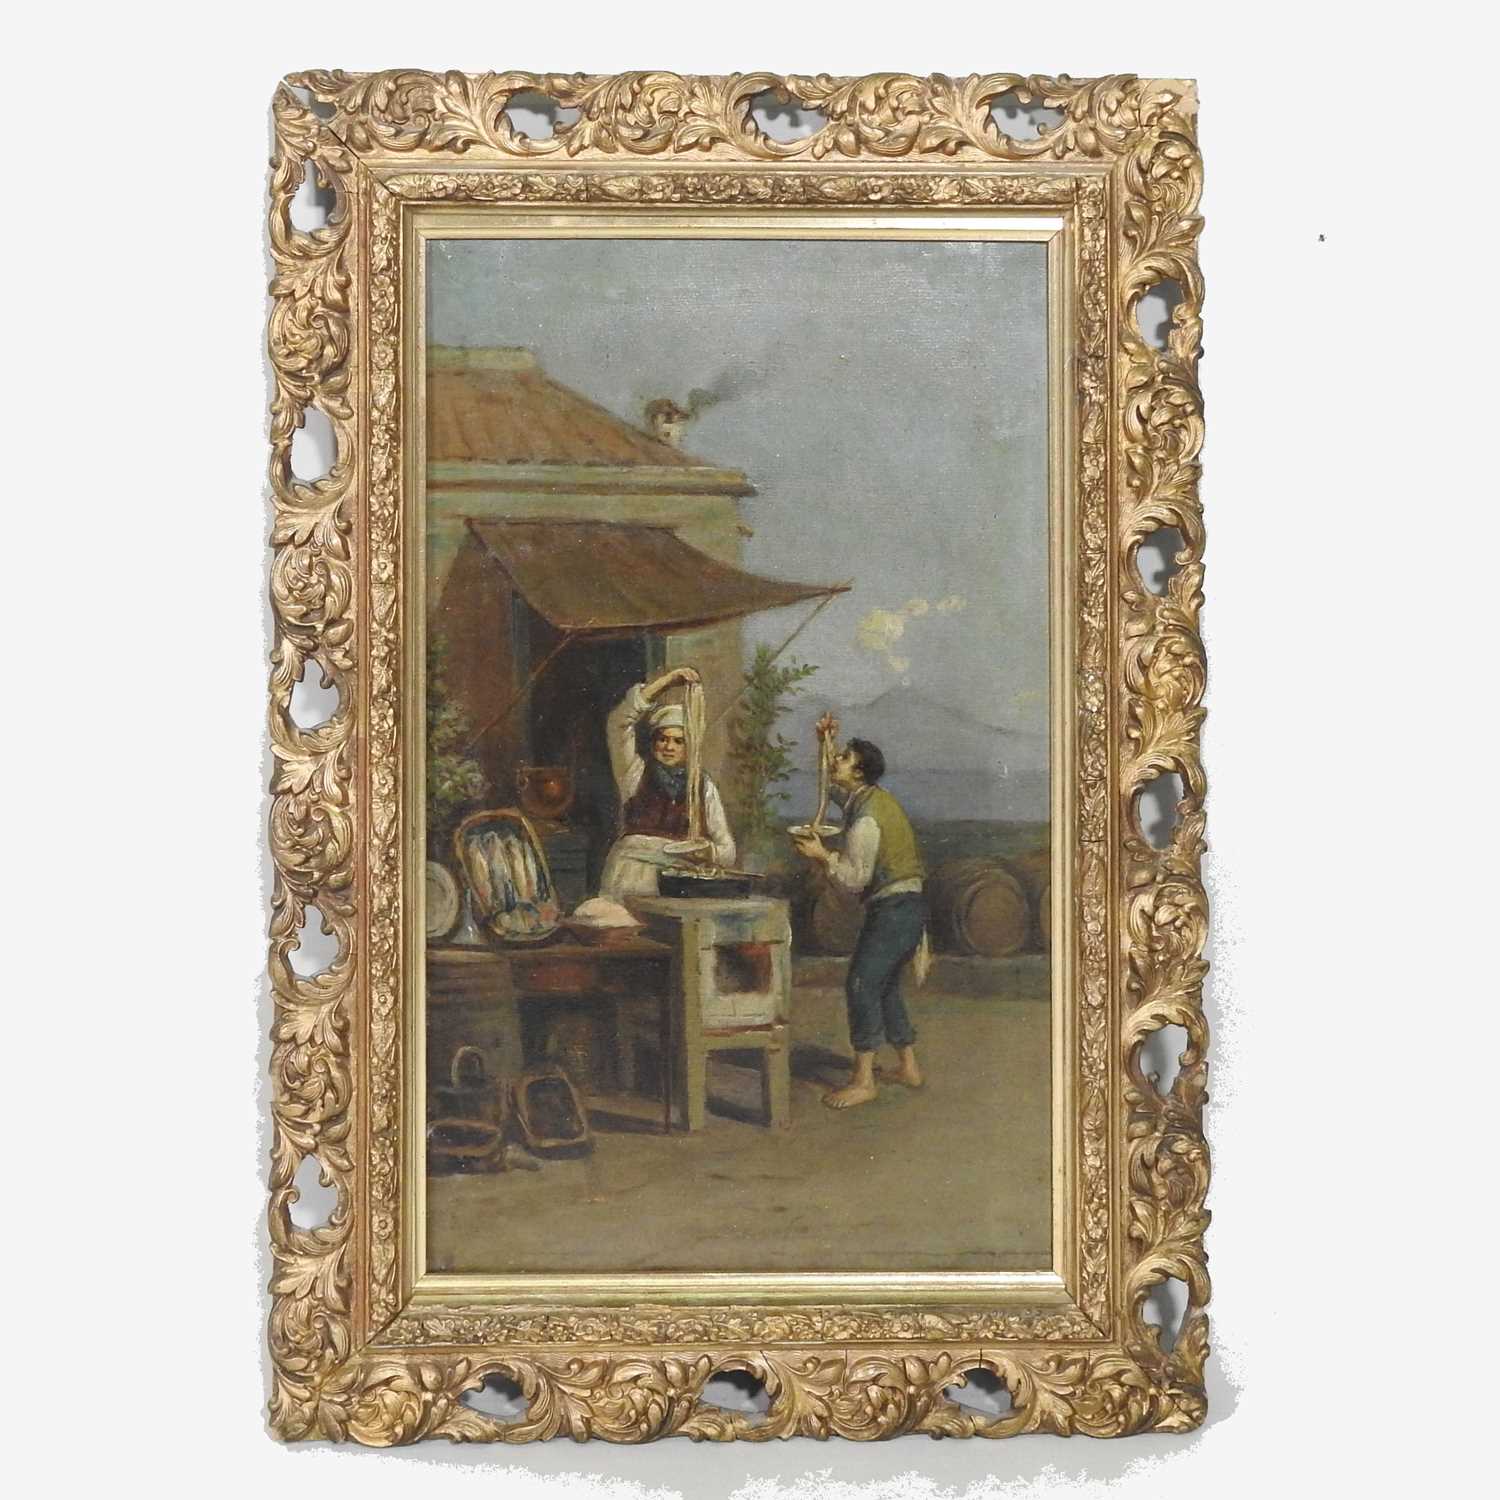 Neapolitan school, 19th century, The Spaghetti Seller, with view of Naples in the distance, oil on